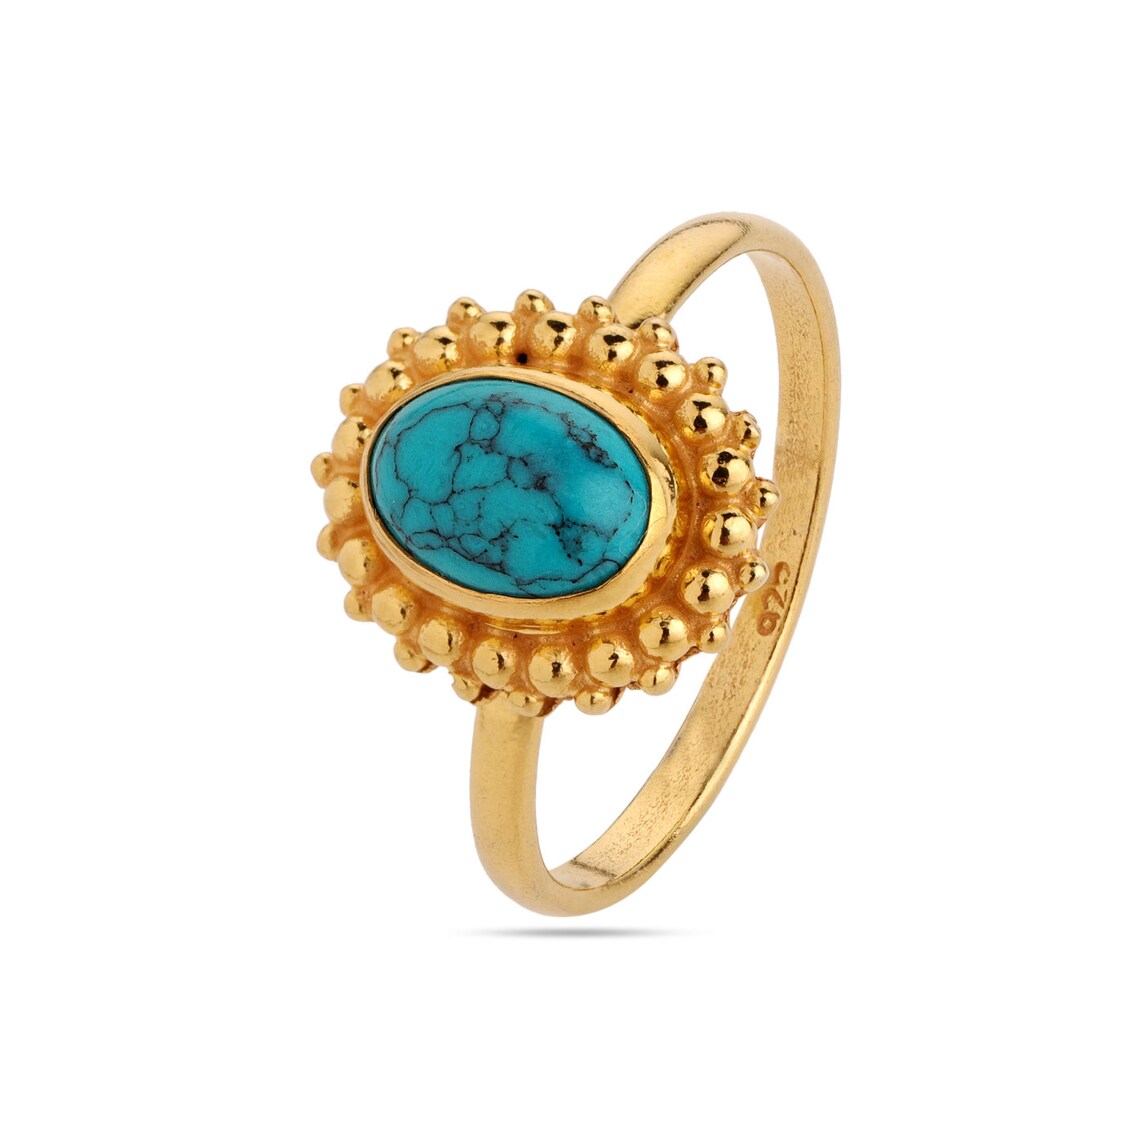 Turquoise Ring - Gold Ring - Gemstone Ring - Oval Ring - Stacking Ring - December Birthstone - Simple Ring - Turquoise Gold Ring